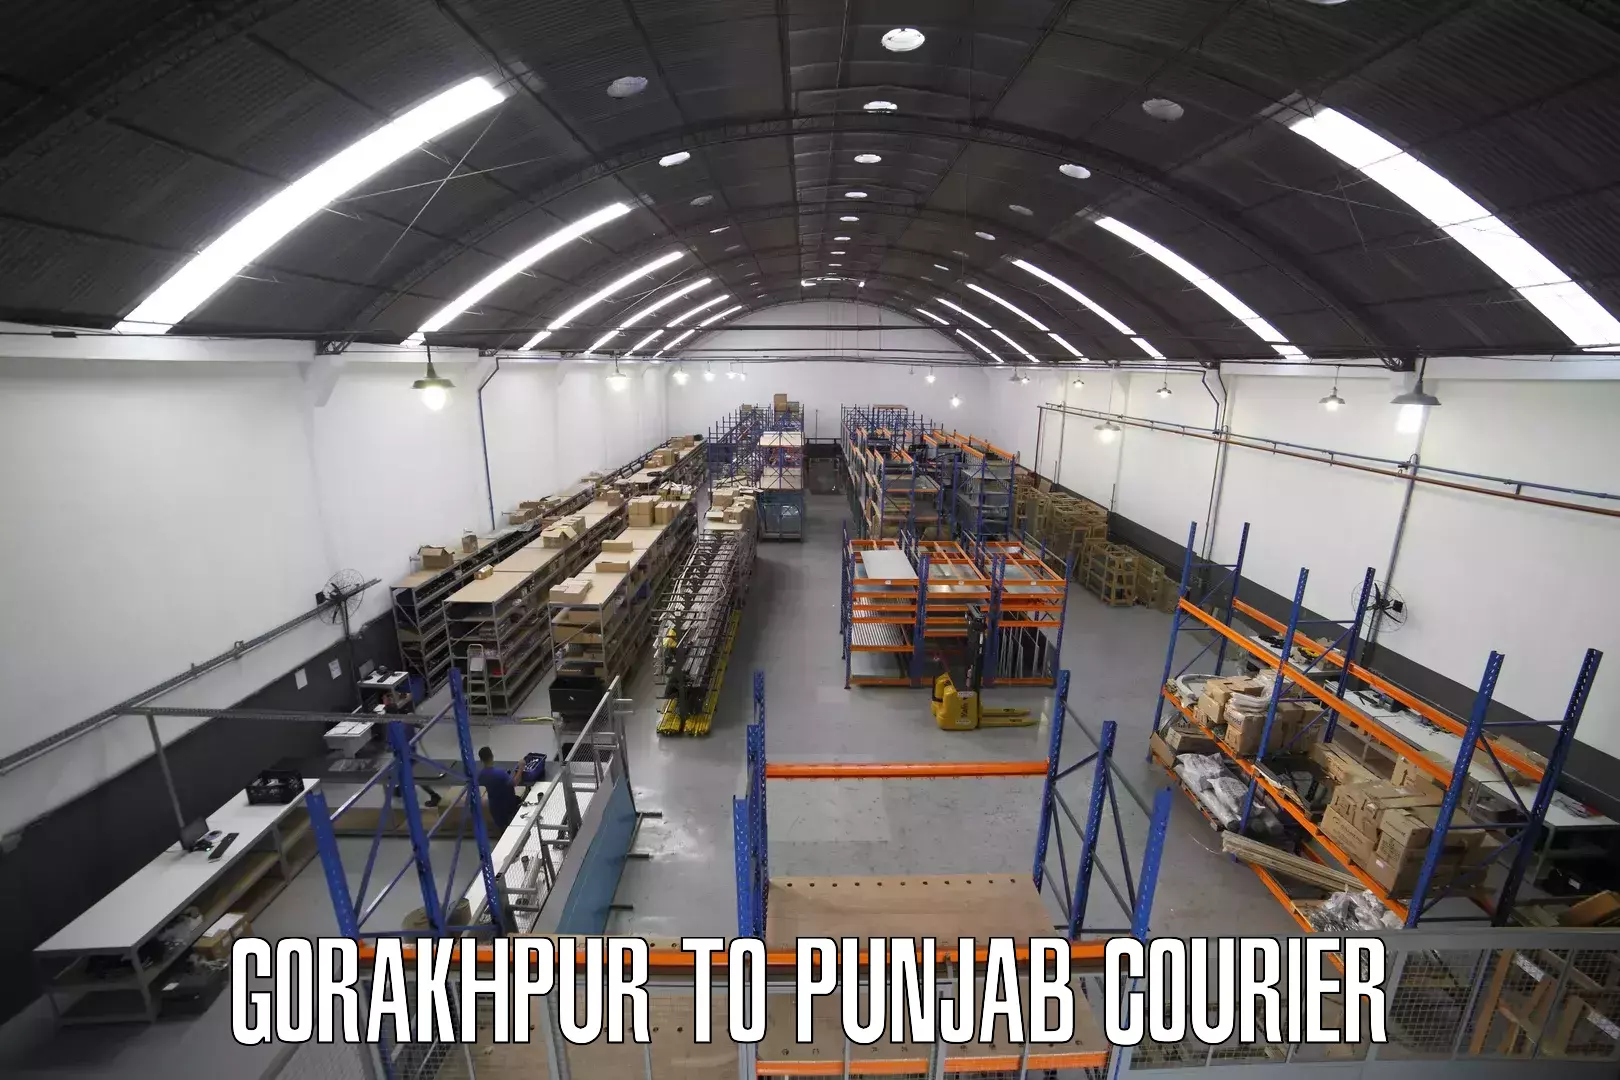 Quality courier services Gorakhpur to Malout